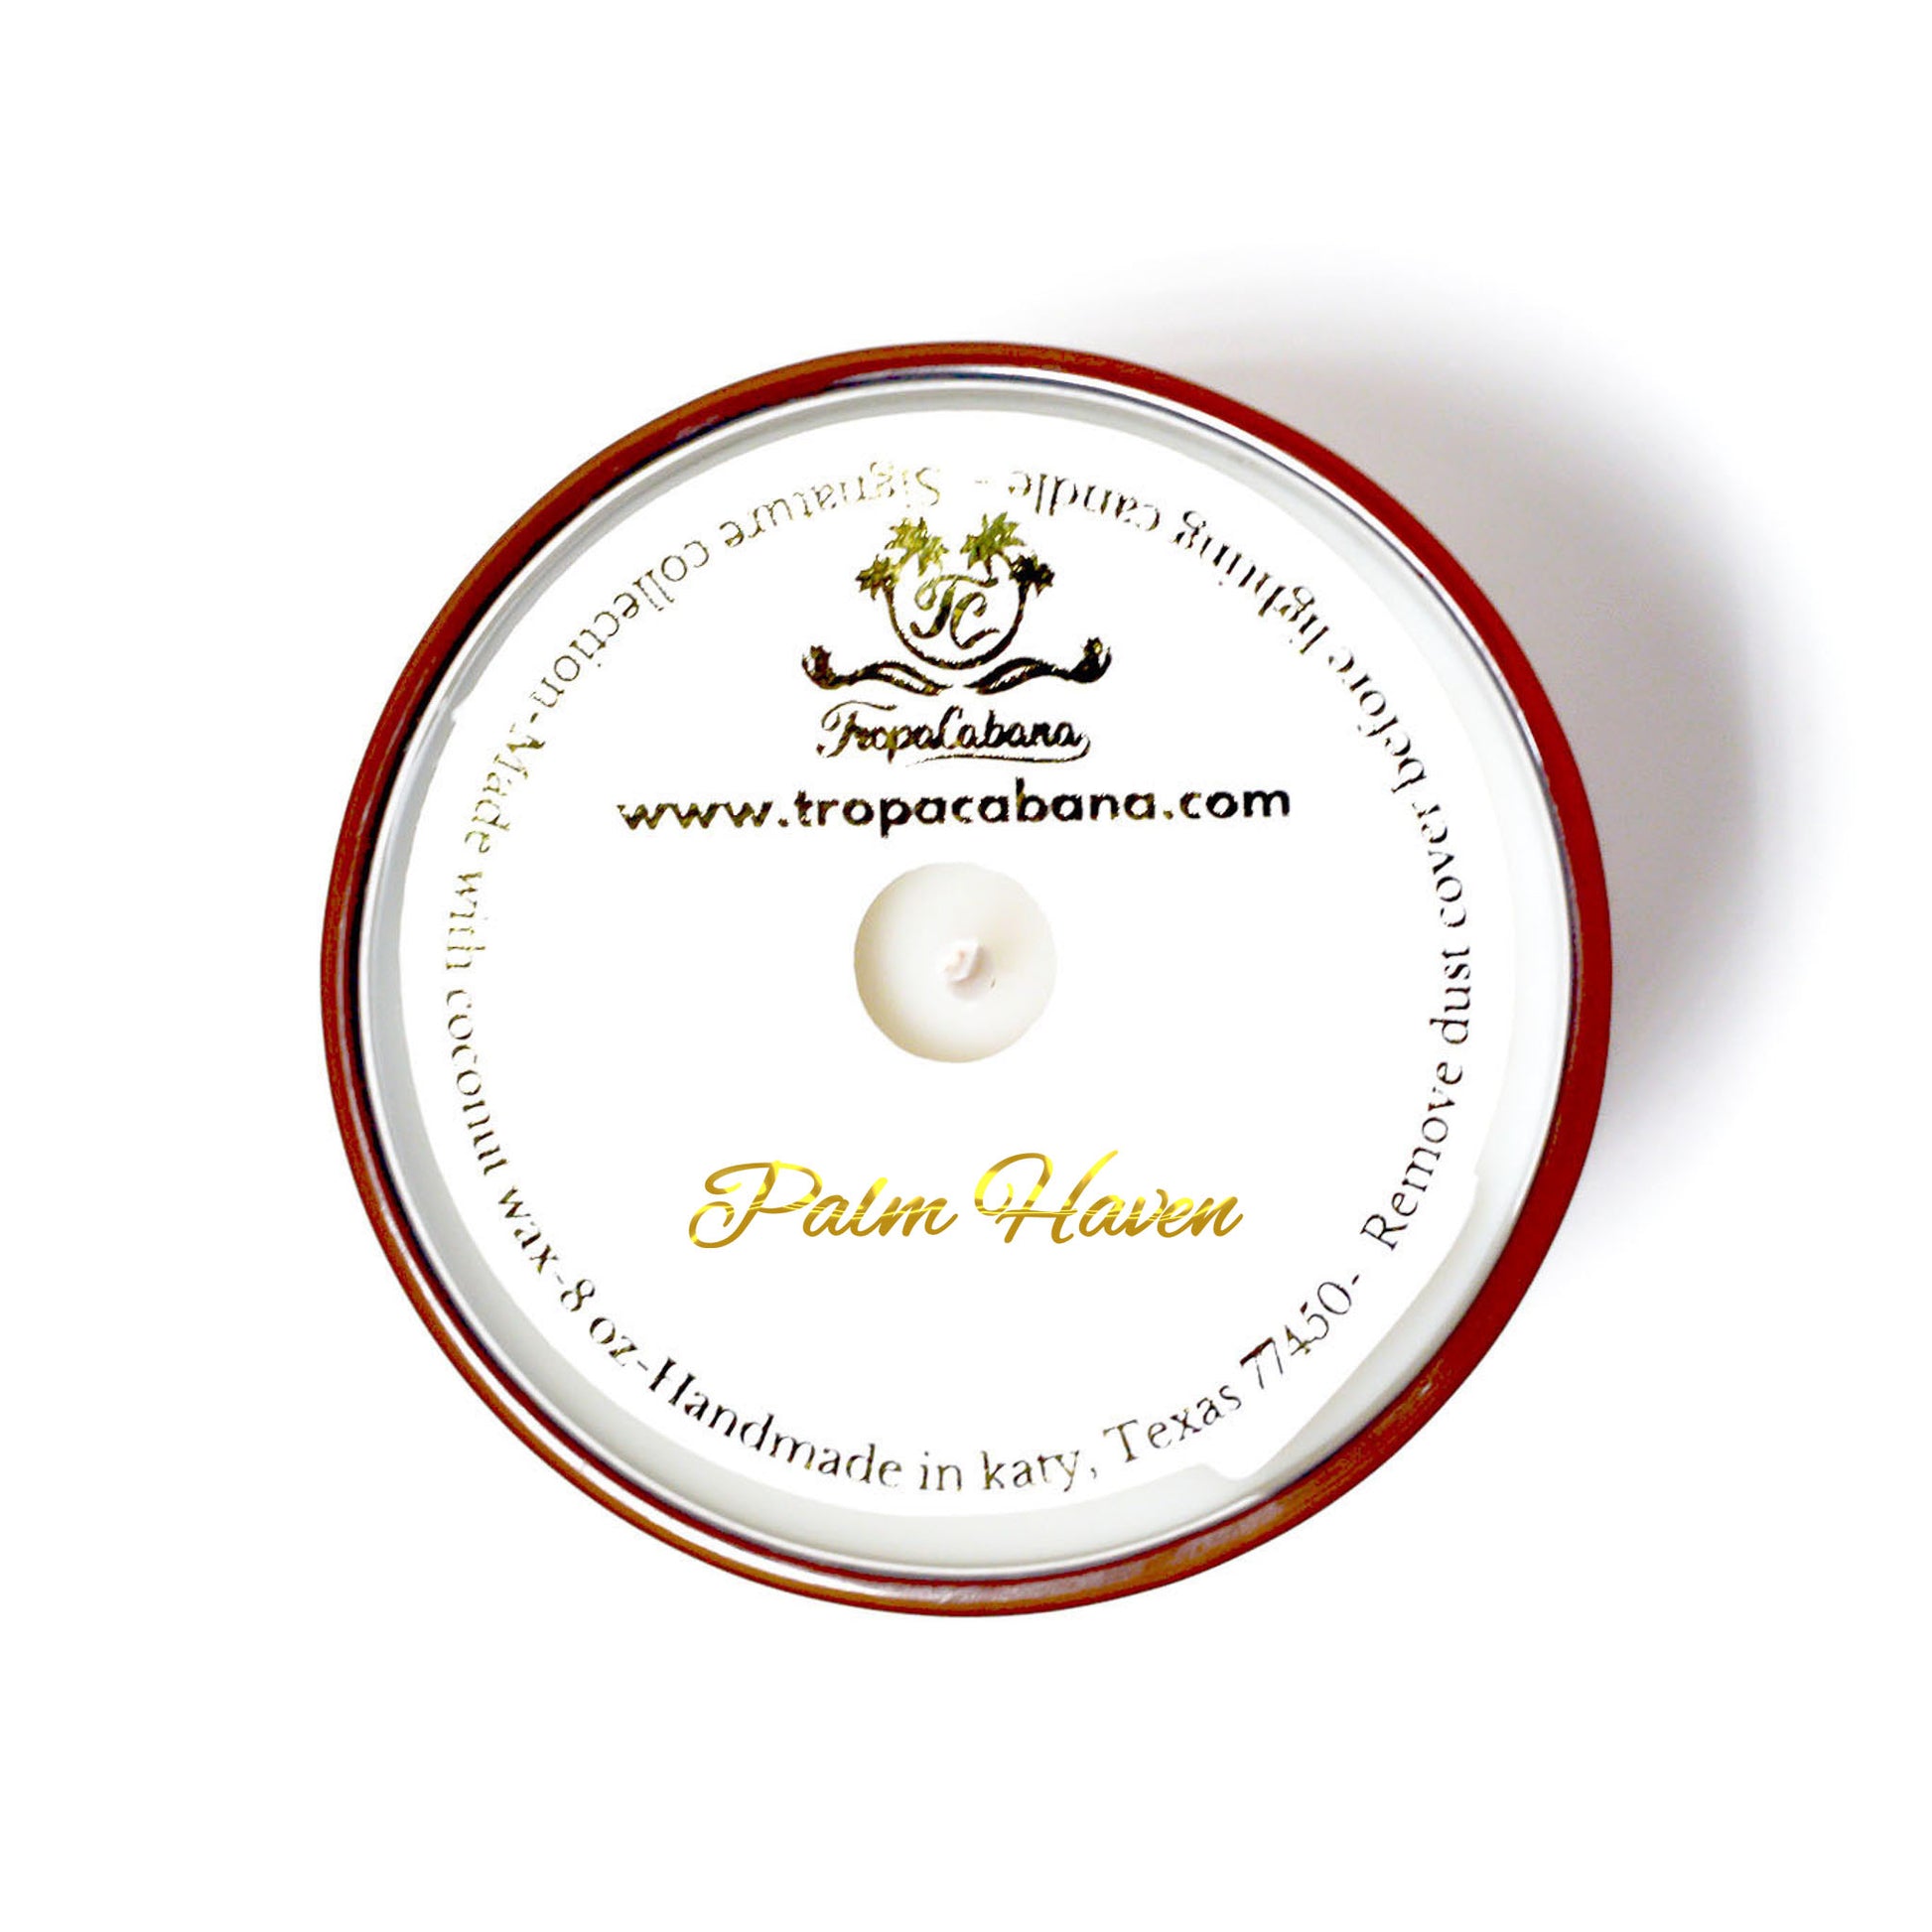 8 oz Palm Haven Candle, Signature Collection, TropaCabana, Scented Candle, Luxury Candle, Vegan Candle, Coconut Wax Candle, Tropical Candle, Handmade, Handpoured, Gifts for her, Gifts for him, Unisex